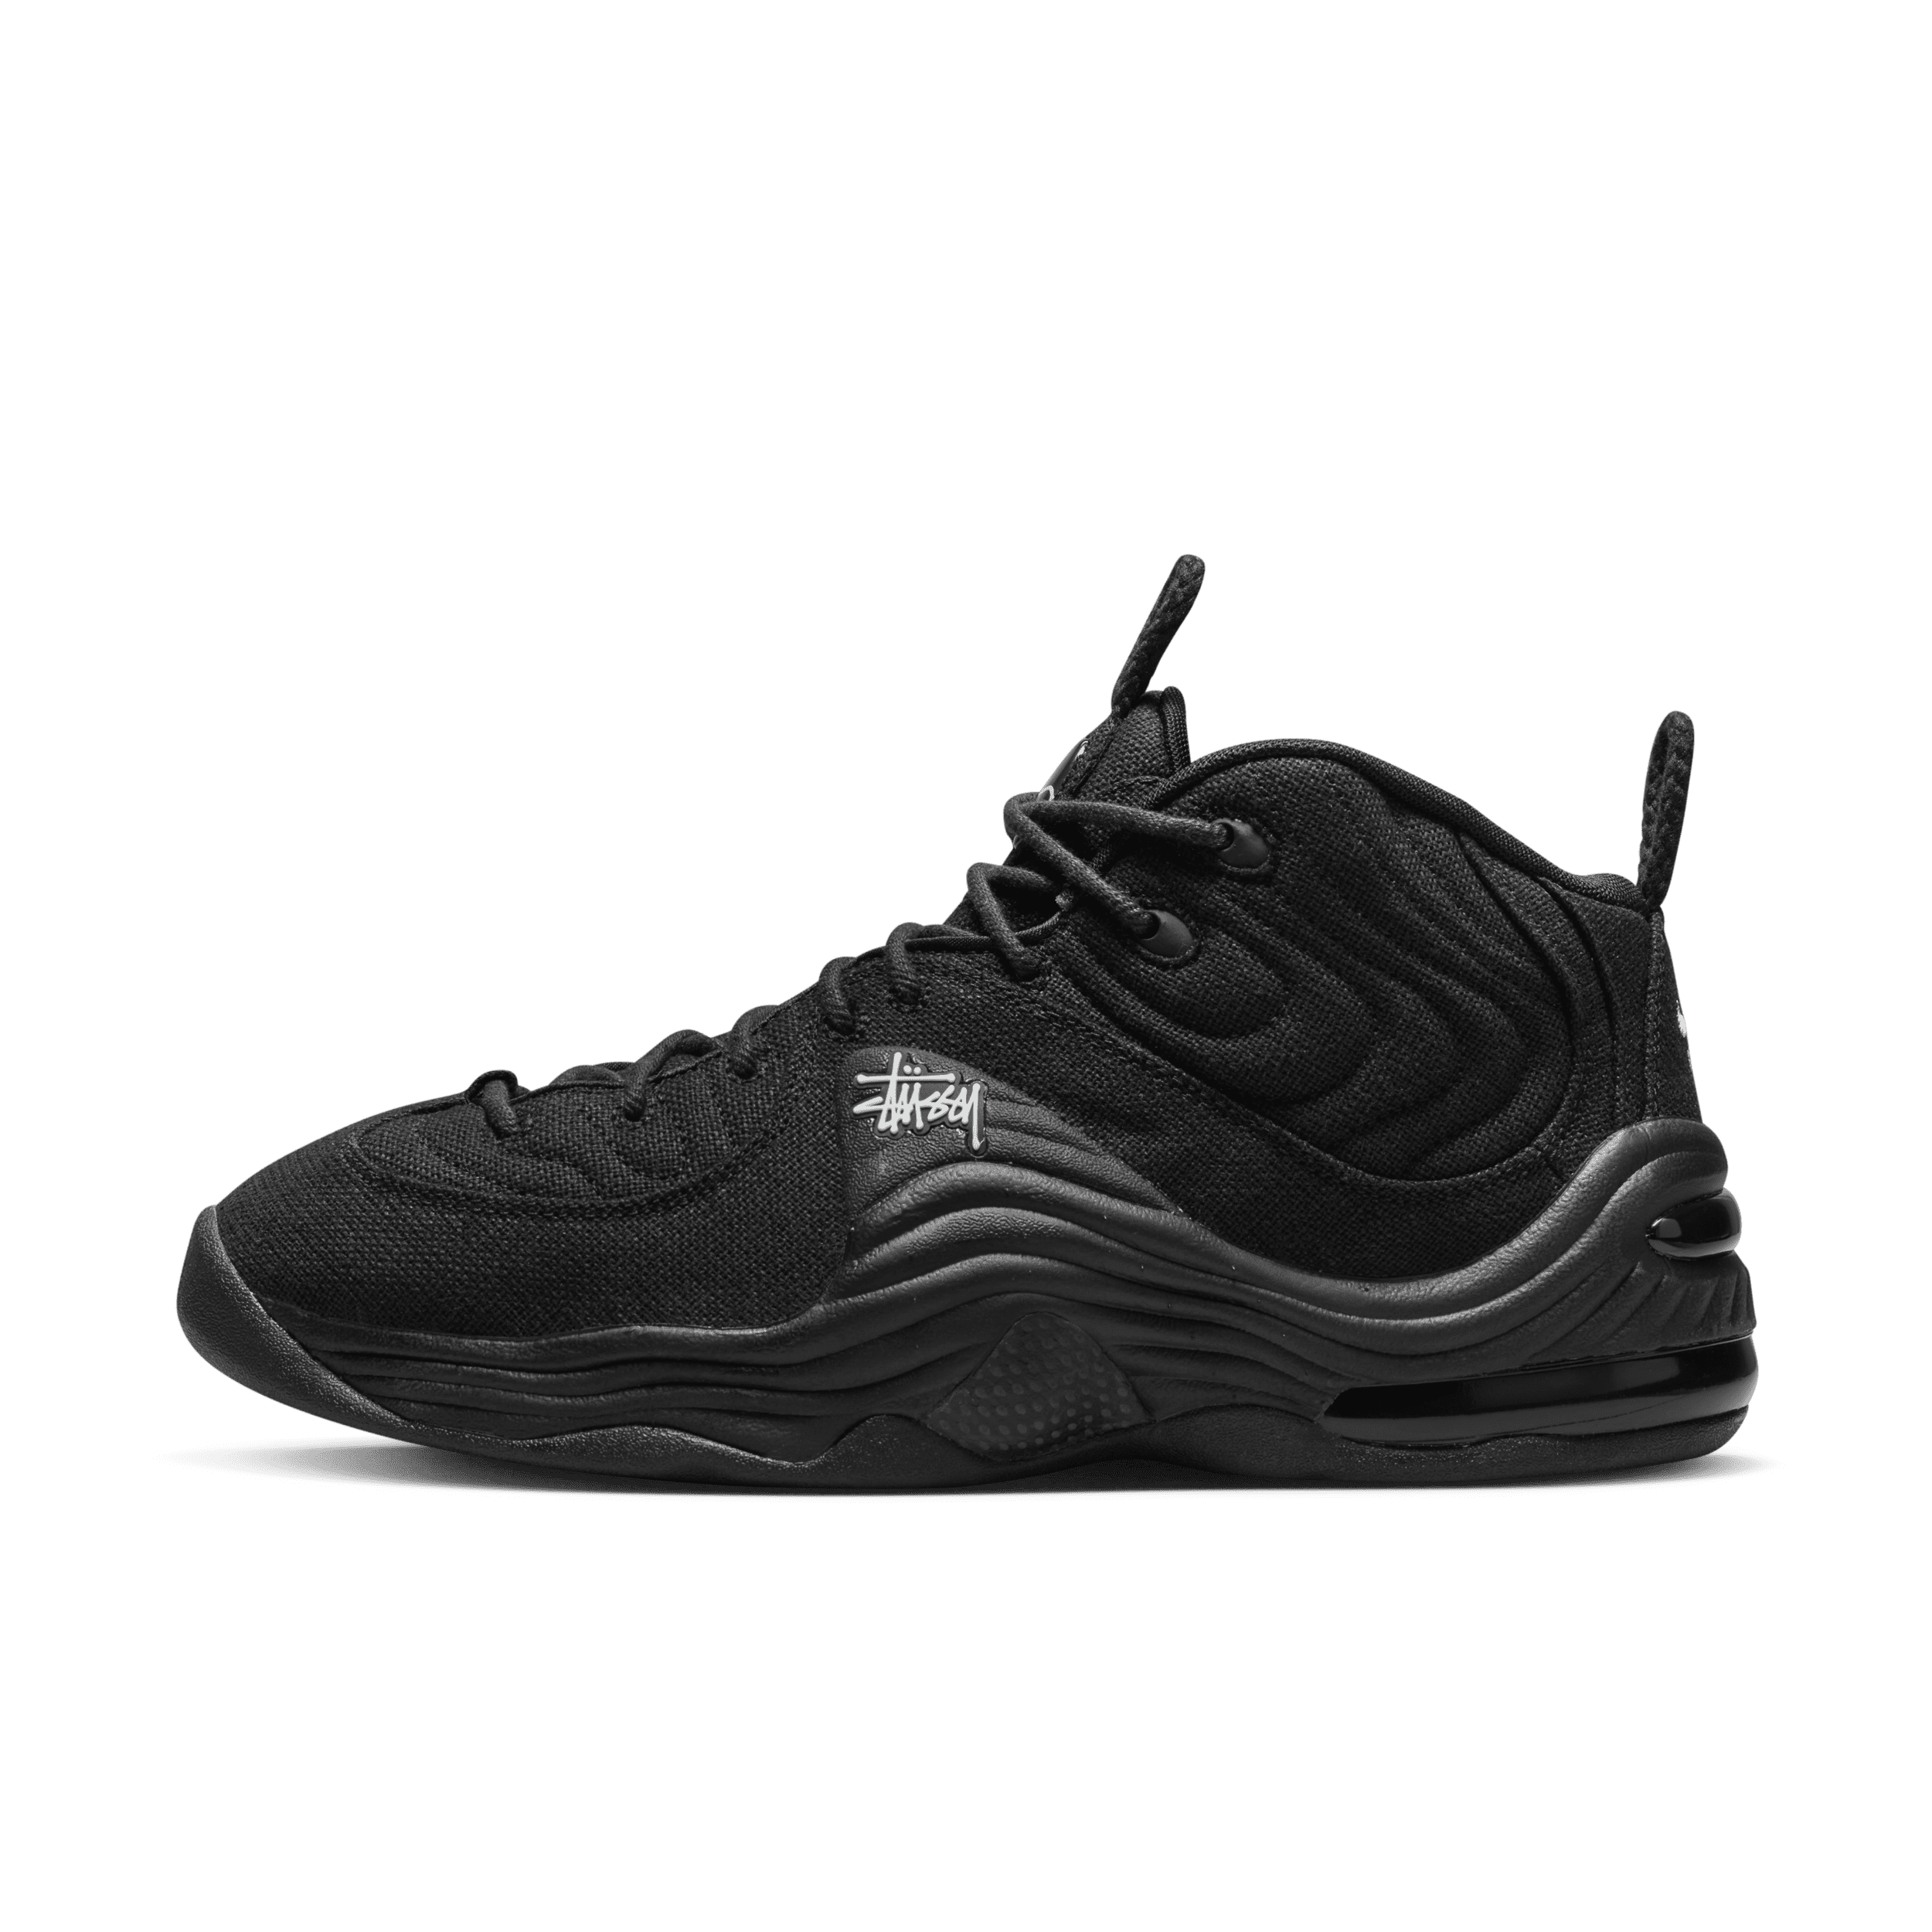 Chaussure Nike Air Penny 2 x Stussy pour homme - Noir